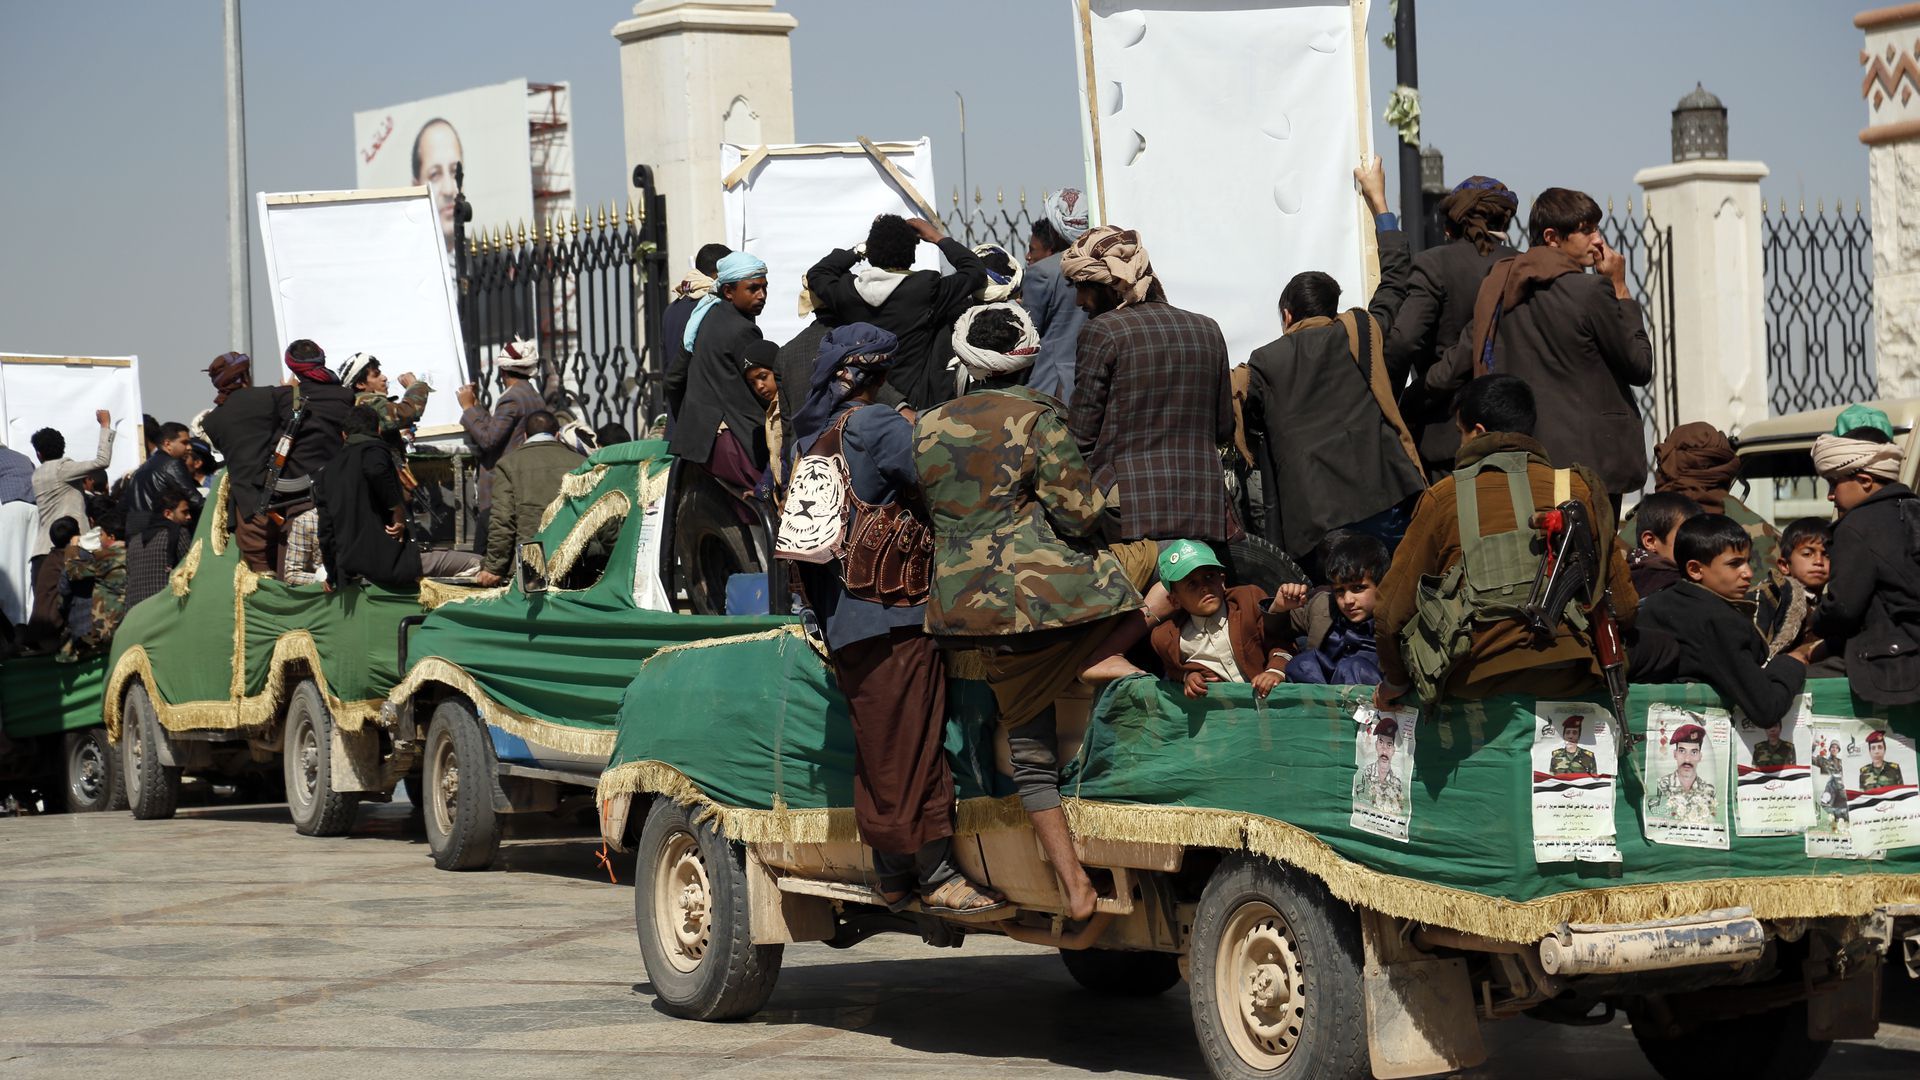 Houthi followers ride vehicles that carry coffins of Houthi fighters who were killed in fighting around Yemen's Marib city in November 2021. Photo: Mohammed Hamoud/Getty Images